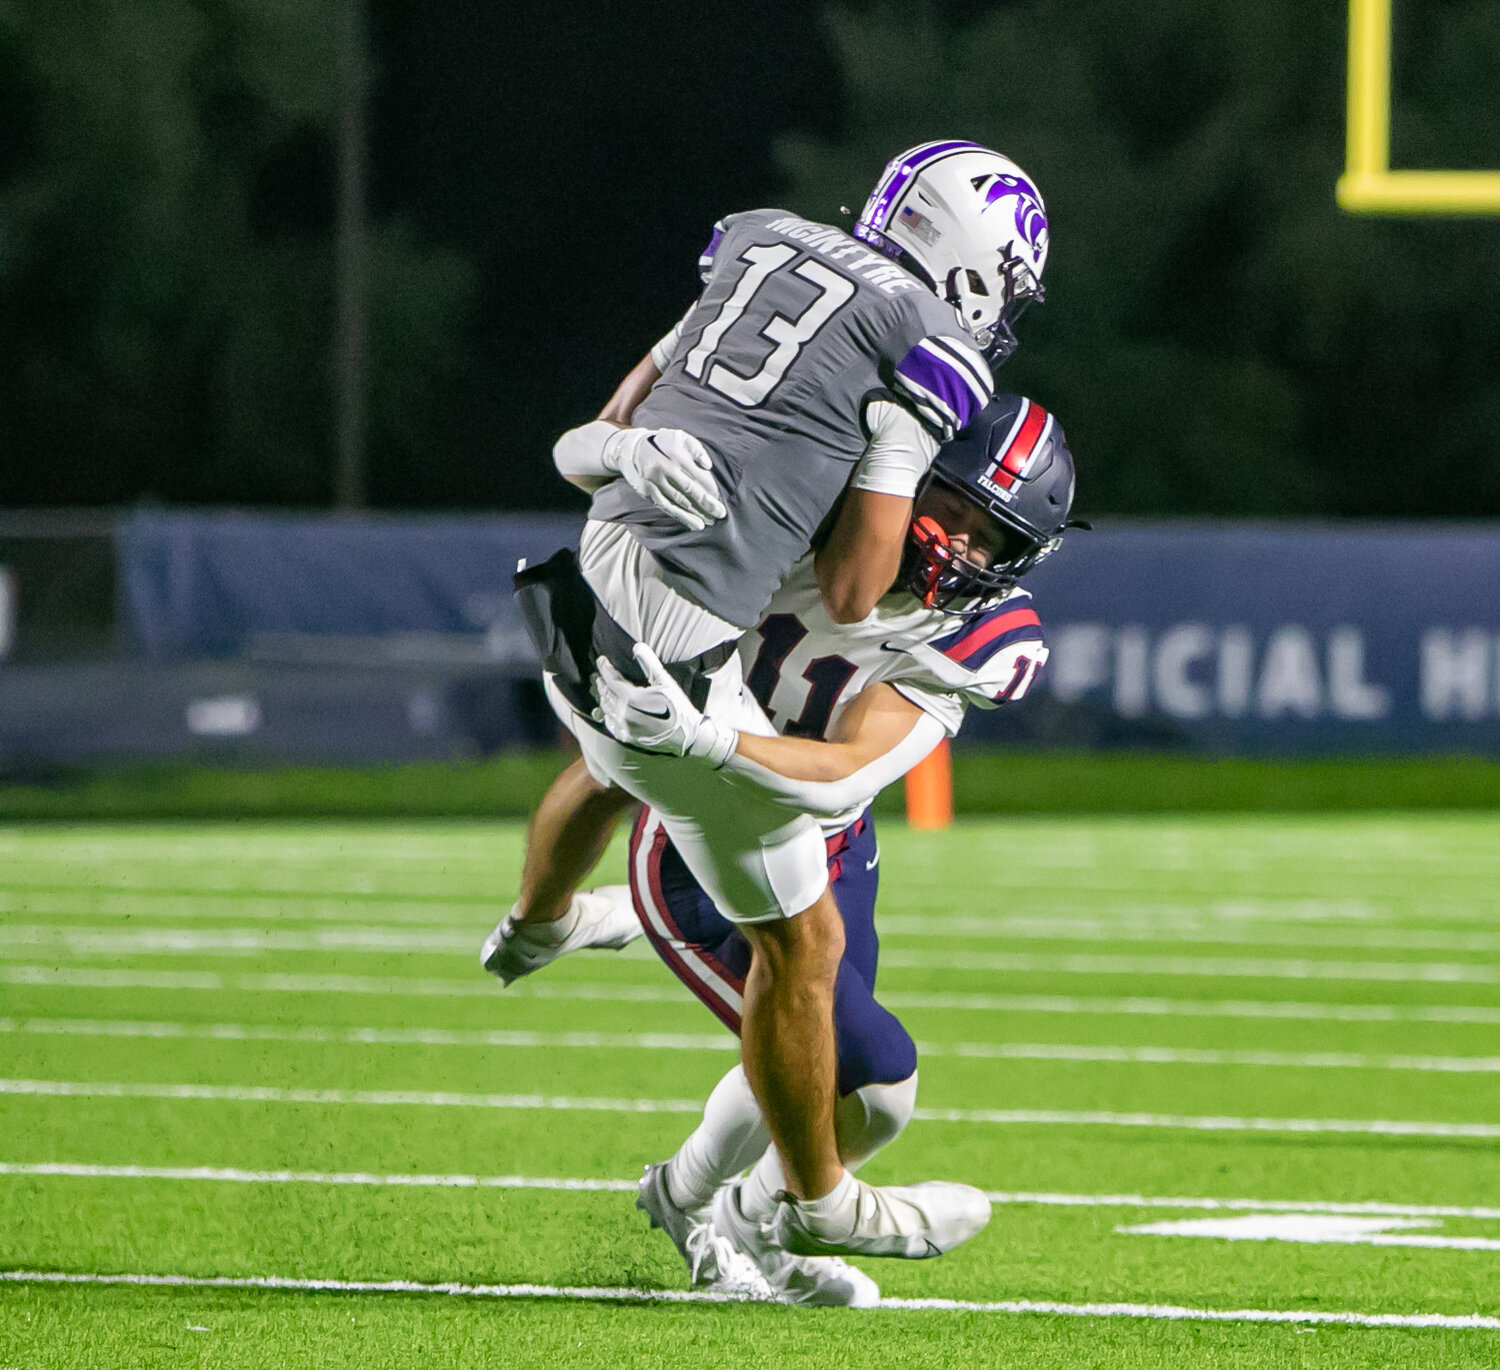 Hunter Boudreaux makes a tackle during Friday's game between Tompkins and Ridge Point at Hall Stadium.